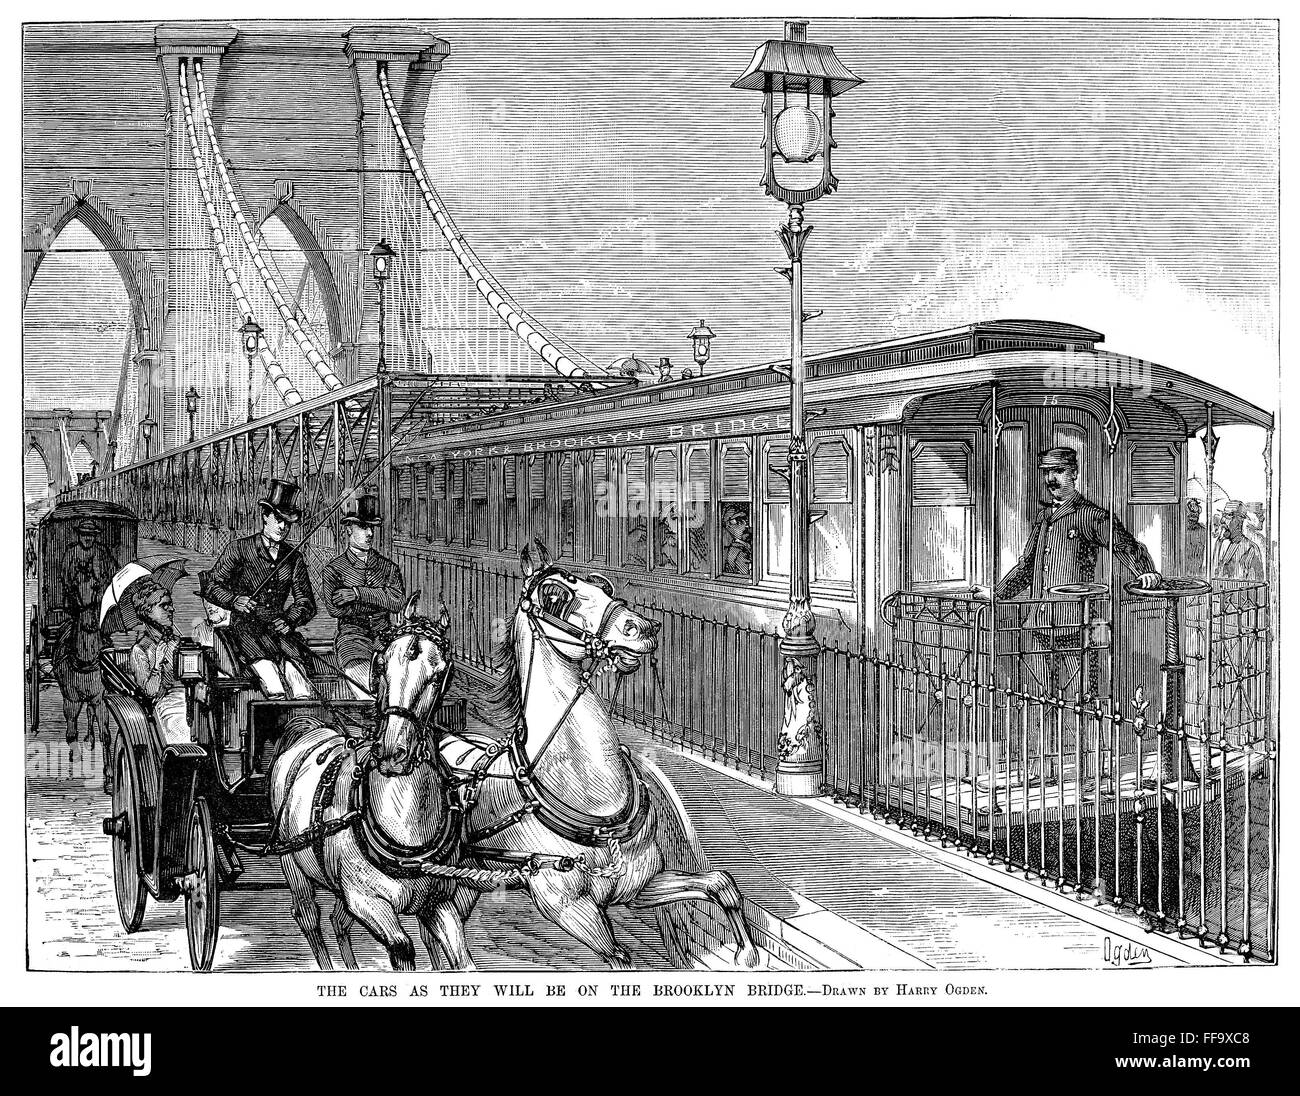 BROOKLYN BRIDGE, 1882. /n'The Cars As They Will Be On The Brooklyn Bridge.' Projected traffic on the soon-to-be completed Brooklyn Bridge. Wood engraving, American, 1882. Stock Photo